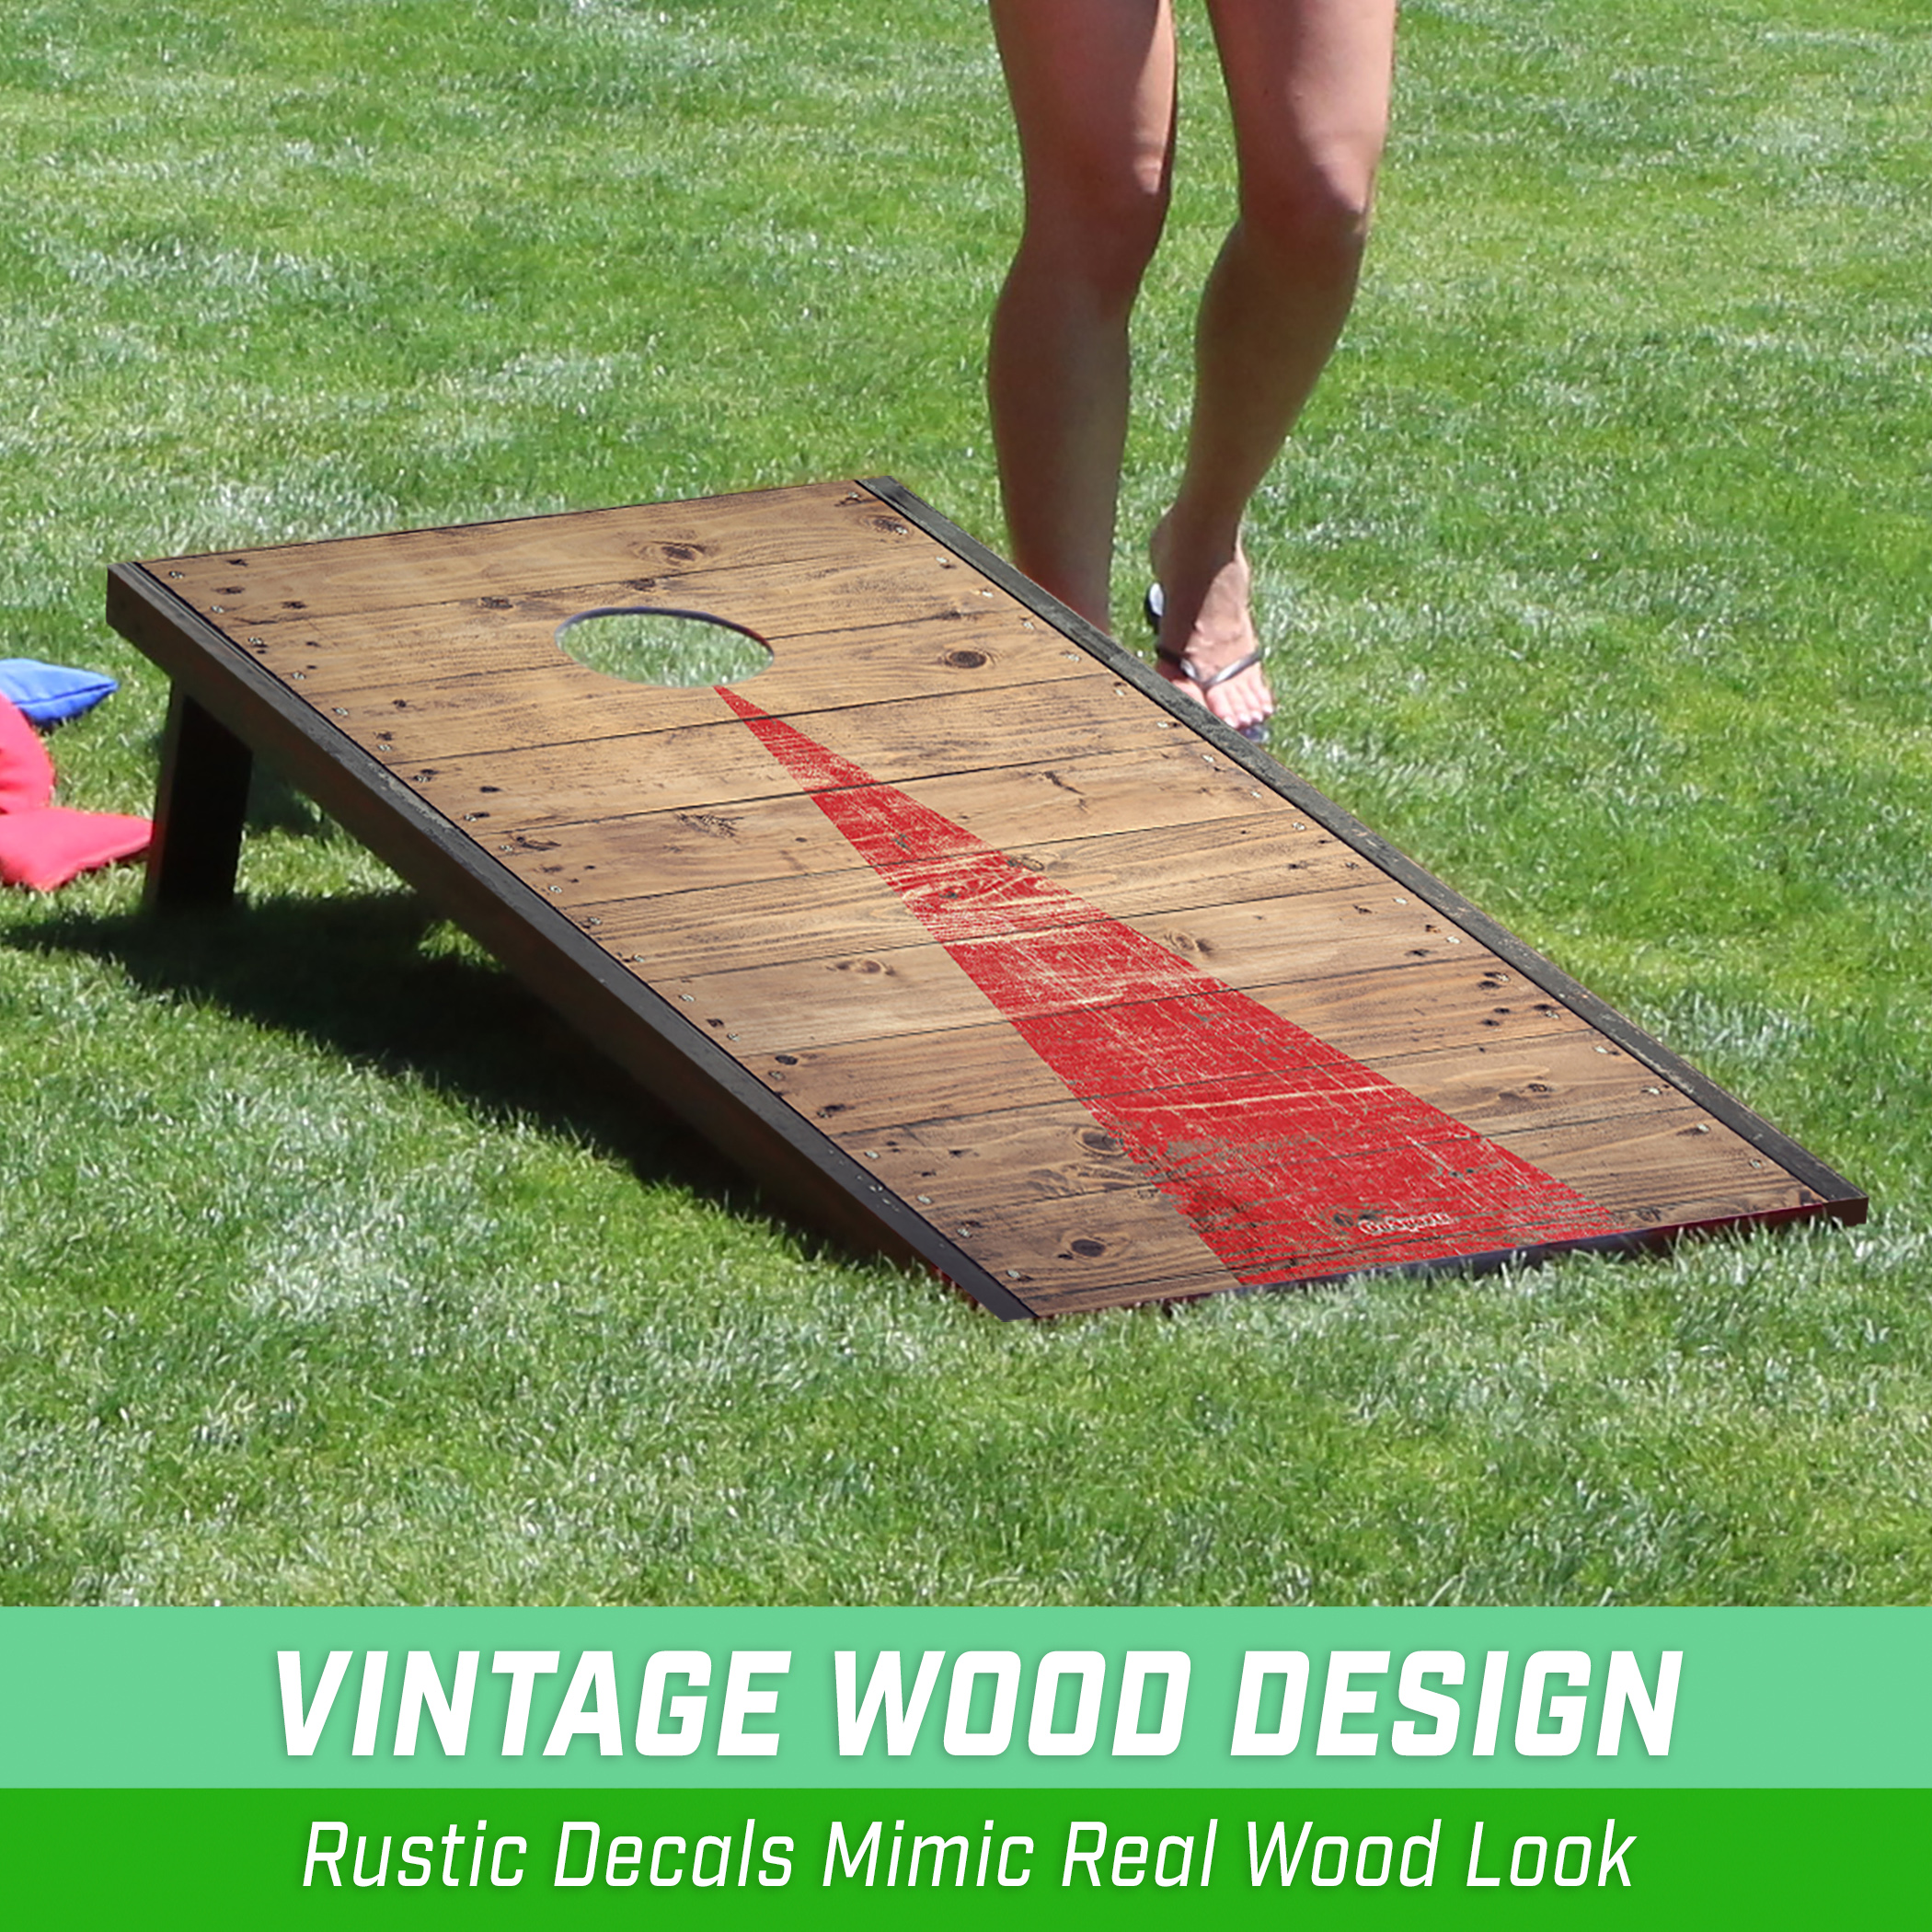 GoSports Classic Cornhole Beanbag Toss Game Set with Rustic Wood Decals - image 2 of 5